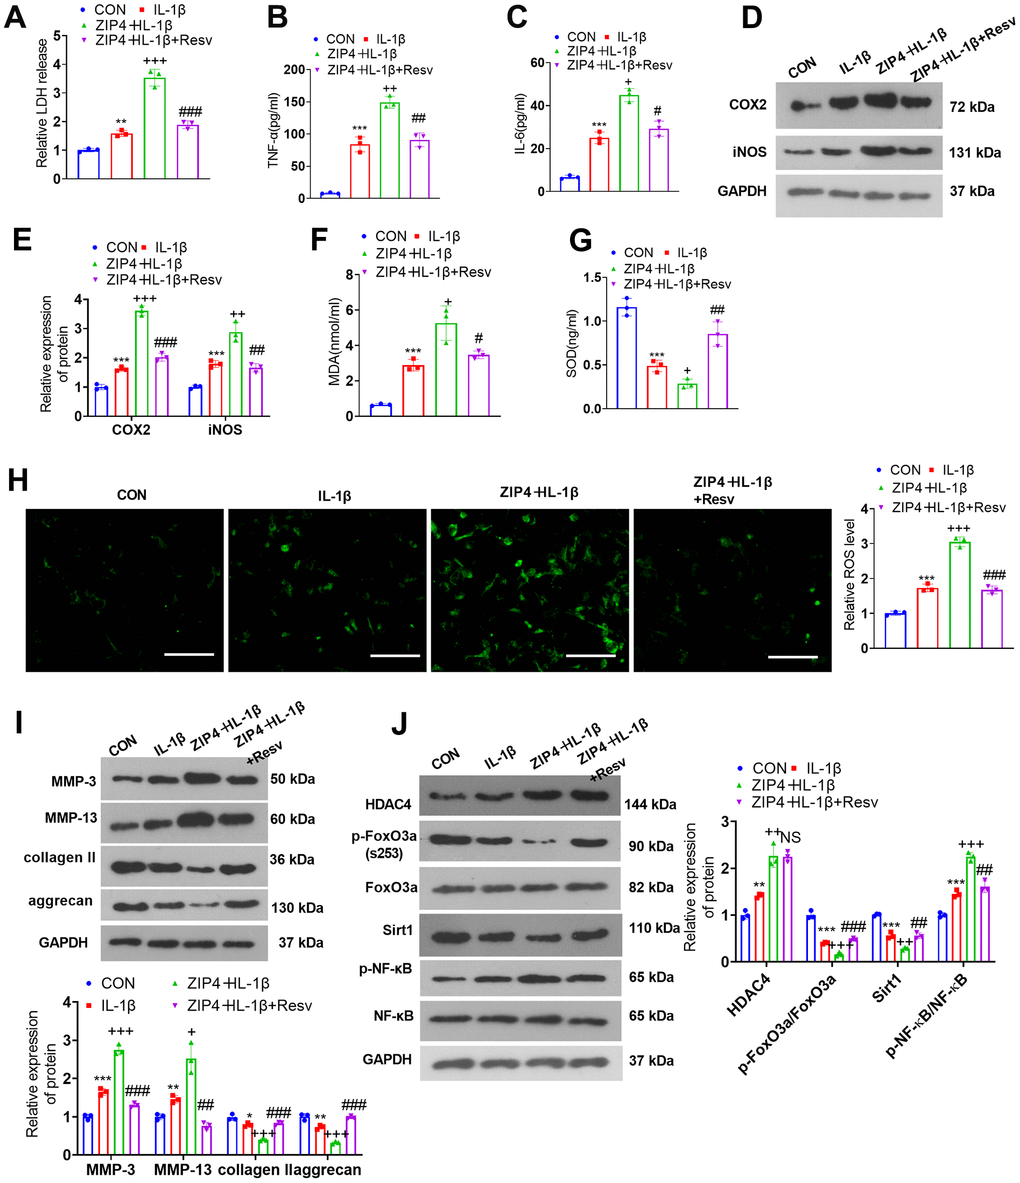 FoxO3a knockdown offsets the damage-promoting function mediated by ZIP4 overexpression. NP cells were treated with IL-1β (20 ng/ml) or Resv (30 μM) for 24 hours. (A) The LDH level in NP cells subjected to treatment with IL-1β. (B, C) The profiles of inflammatory factors in the cells checked by ELISA. (D, E) Western blot analysis confirmed COX2 and iNOS levels in the cells. (F–H) MDA, SOD, and ROS levels in the cells gauged through the assistance of commercial kits. Scale bar=100 μm. (I) MMP-3, MMP-13, collagen II, and aggrecan levels determined through western blot in the cells. (J) HDAC4, FoxO3a, Sirt1, and NF-κB profiles in NP cells following IL-1β treatment. N=3. *P (vs. CON); +P (vs. IL-1β); #P (vs. sh-FoxO3a+IL-1β).